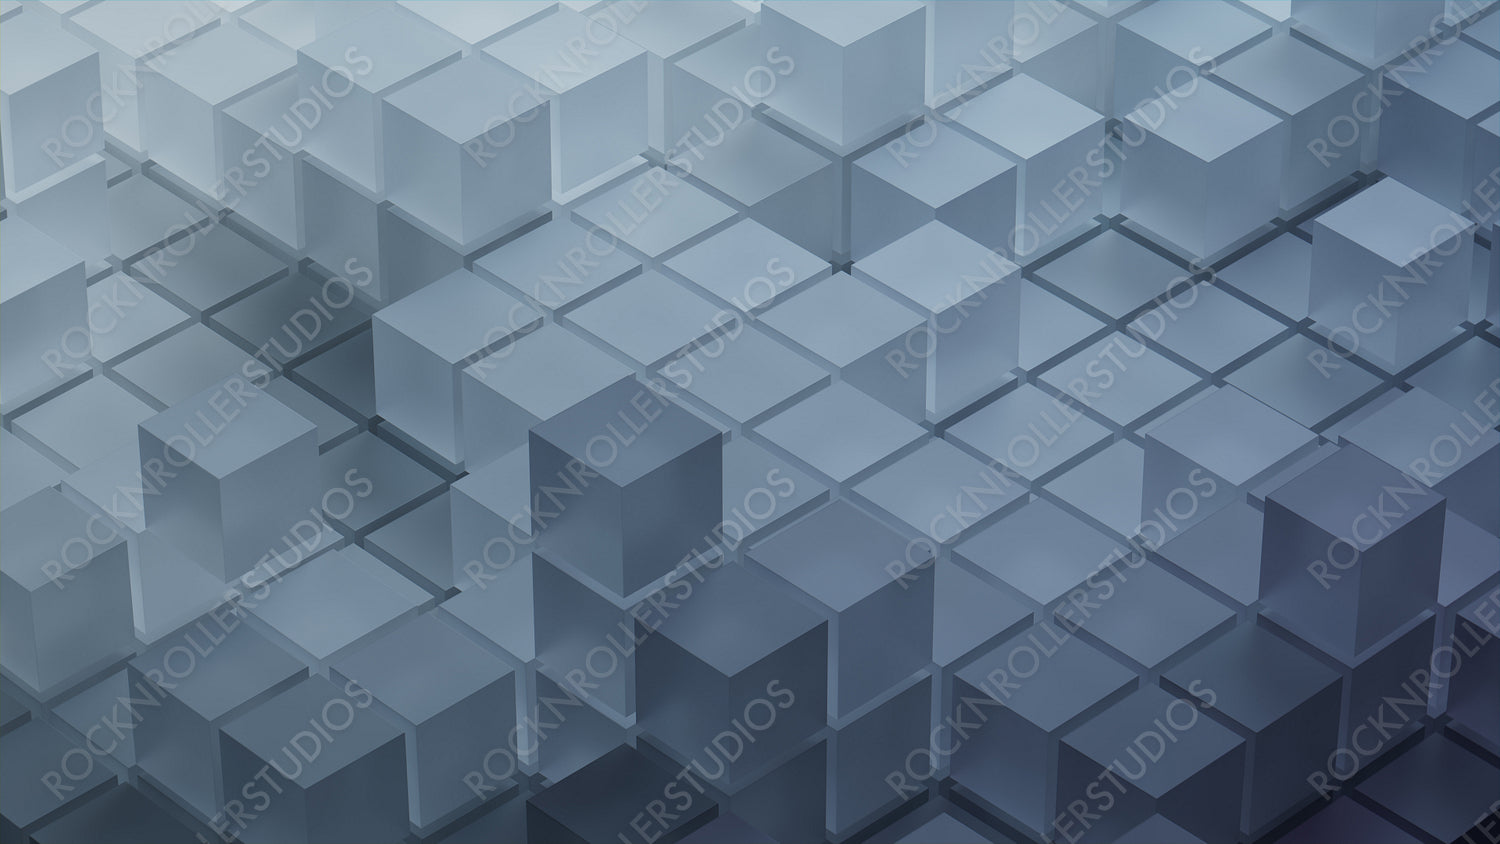 Grey, Translucent Blocks Perfectly Aligned to create a Modern Tech Wallpaper. 3D Render.